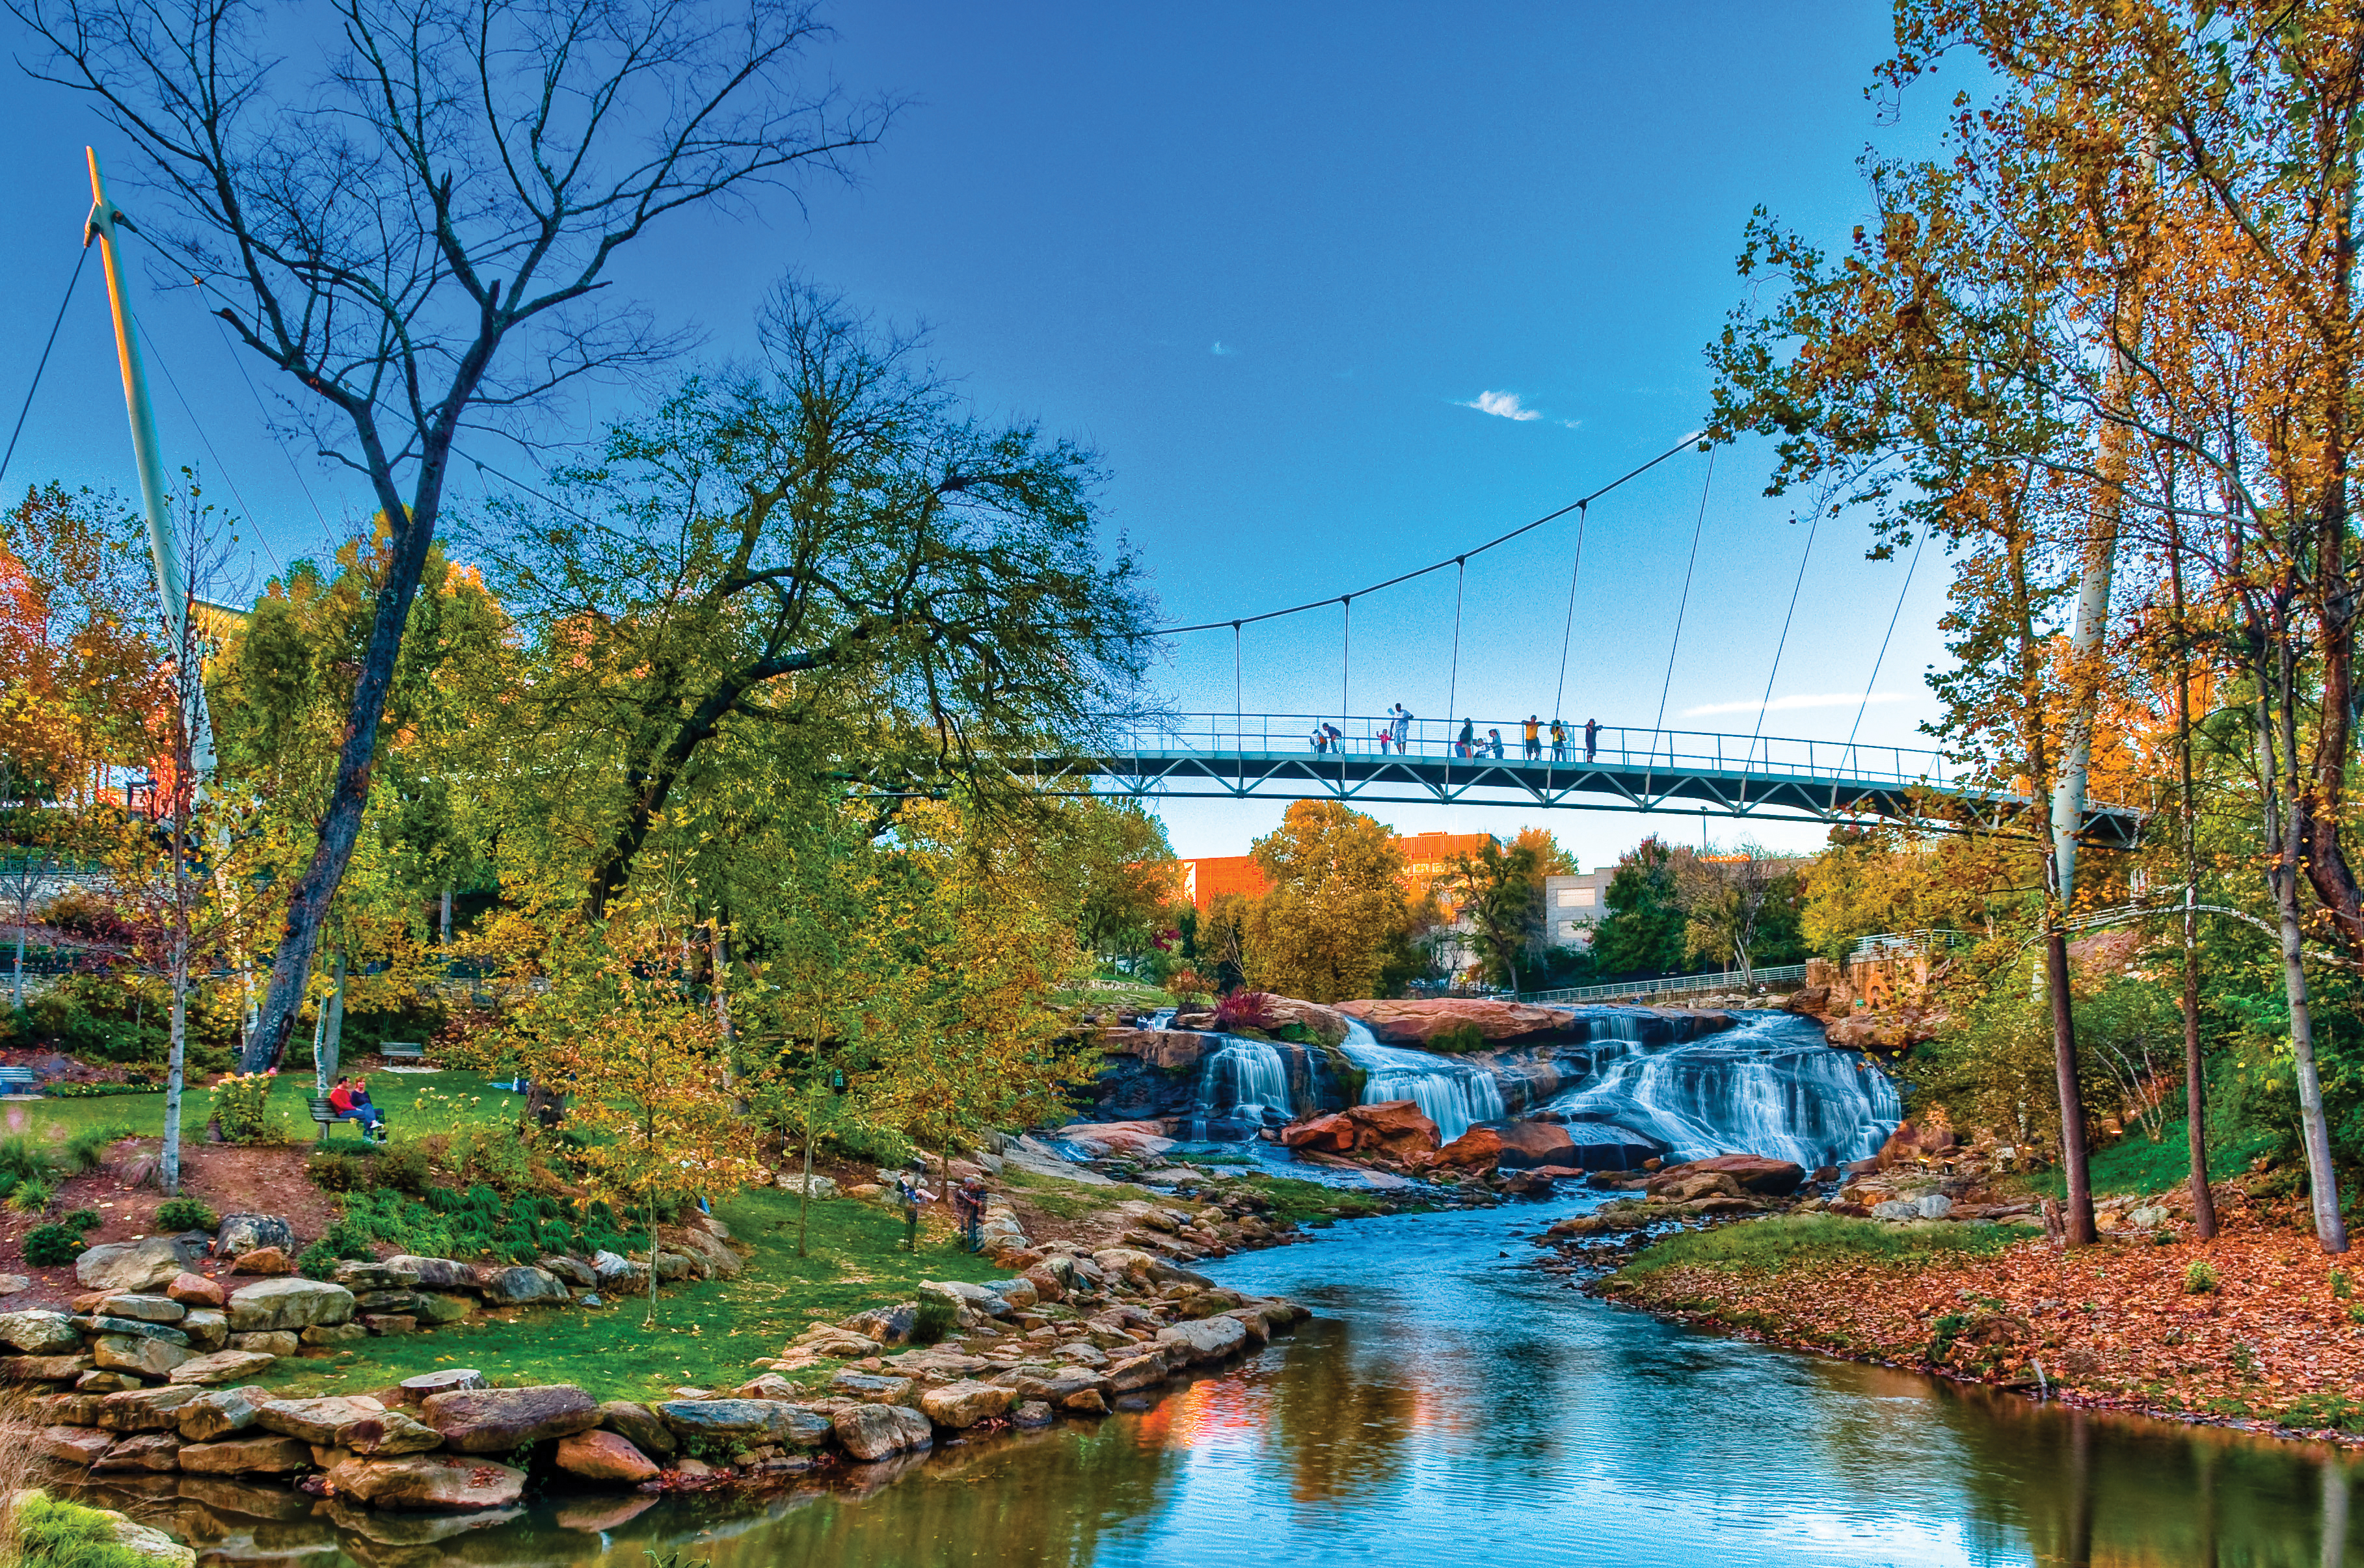 Falls Park on the Reedy featuring the Liberty Bridge